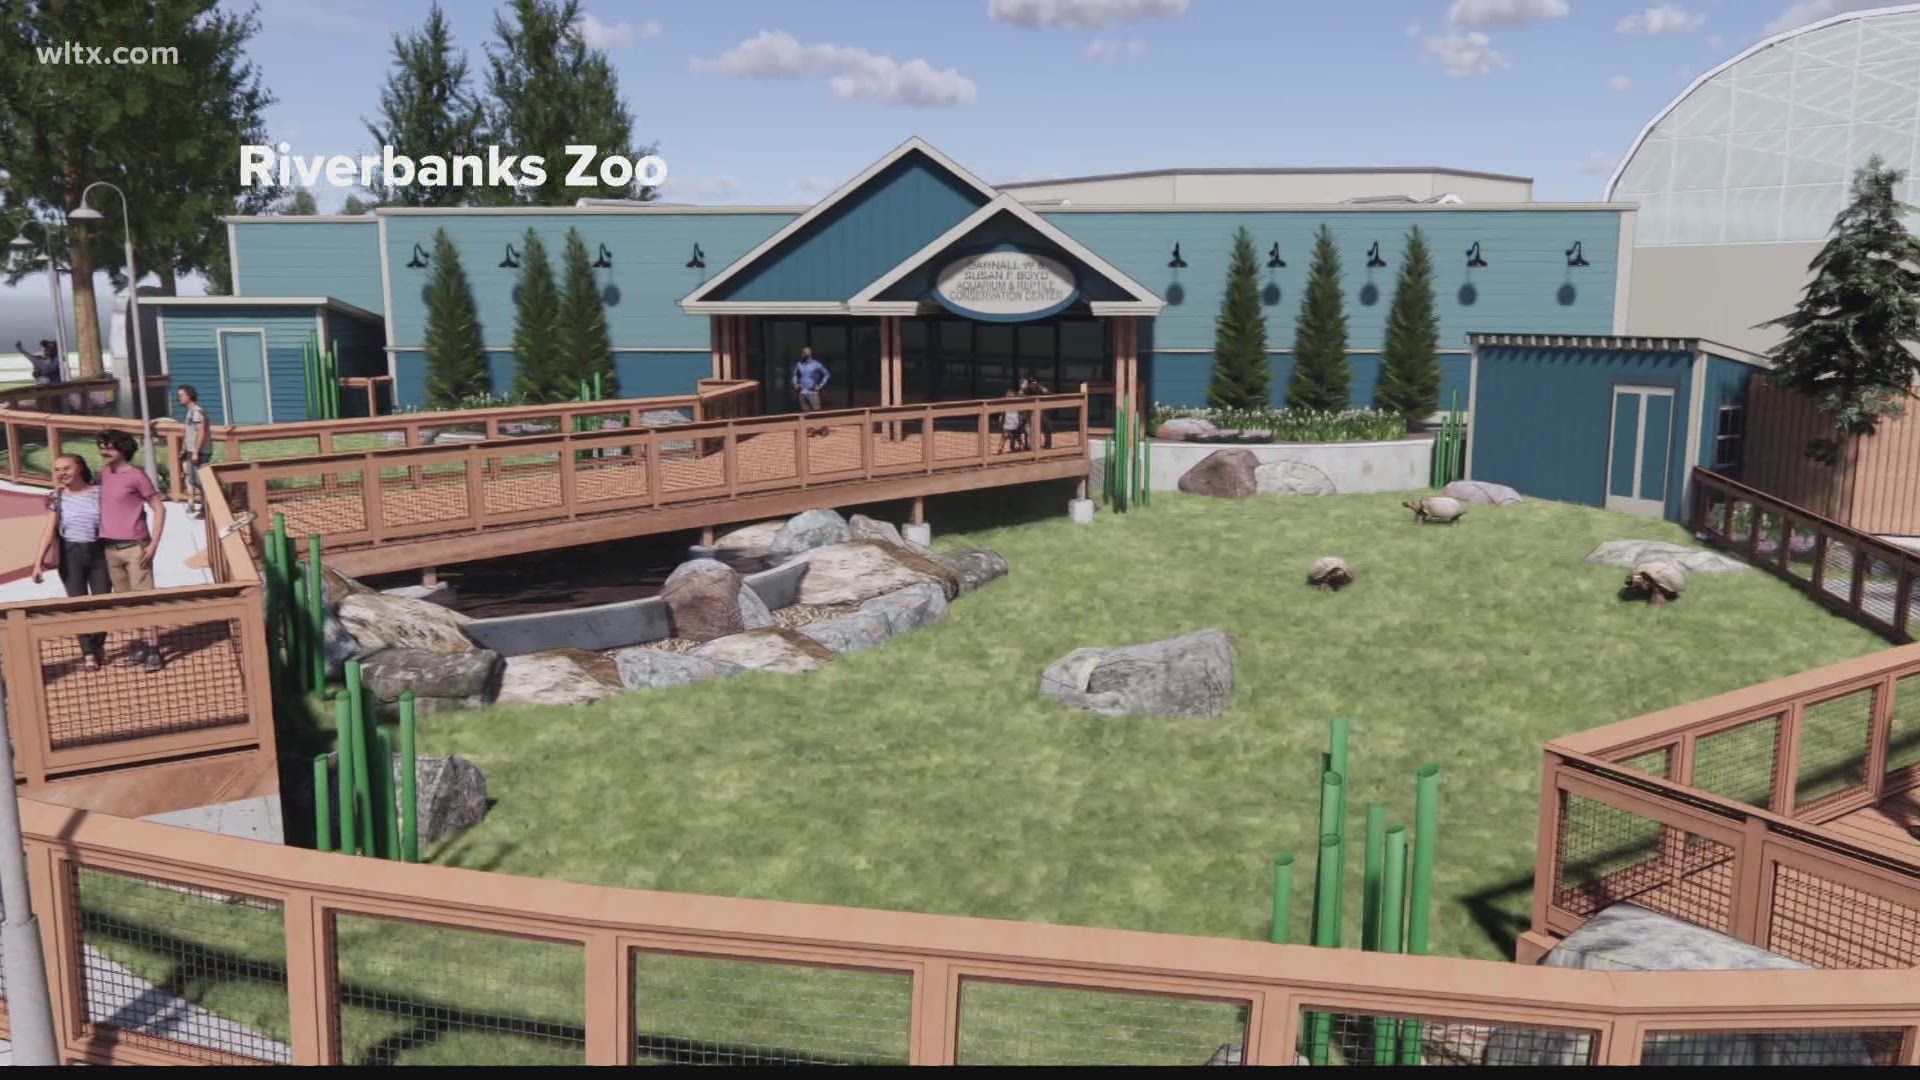 Riverbanks Zoo and Garden is getting a new look for some of it's exhibits.